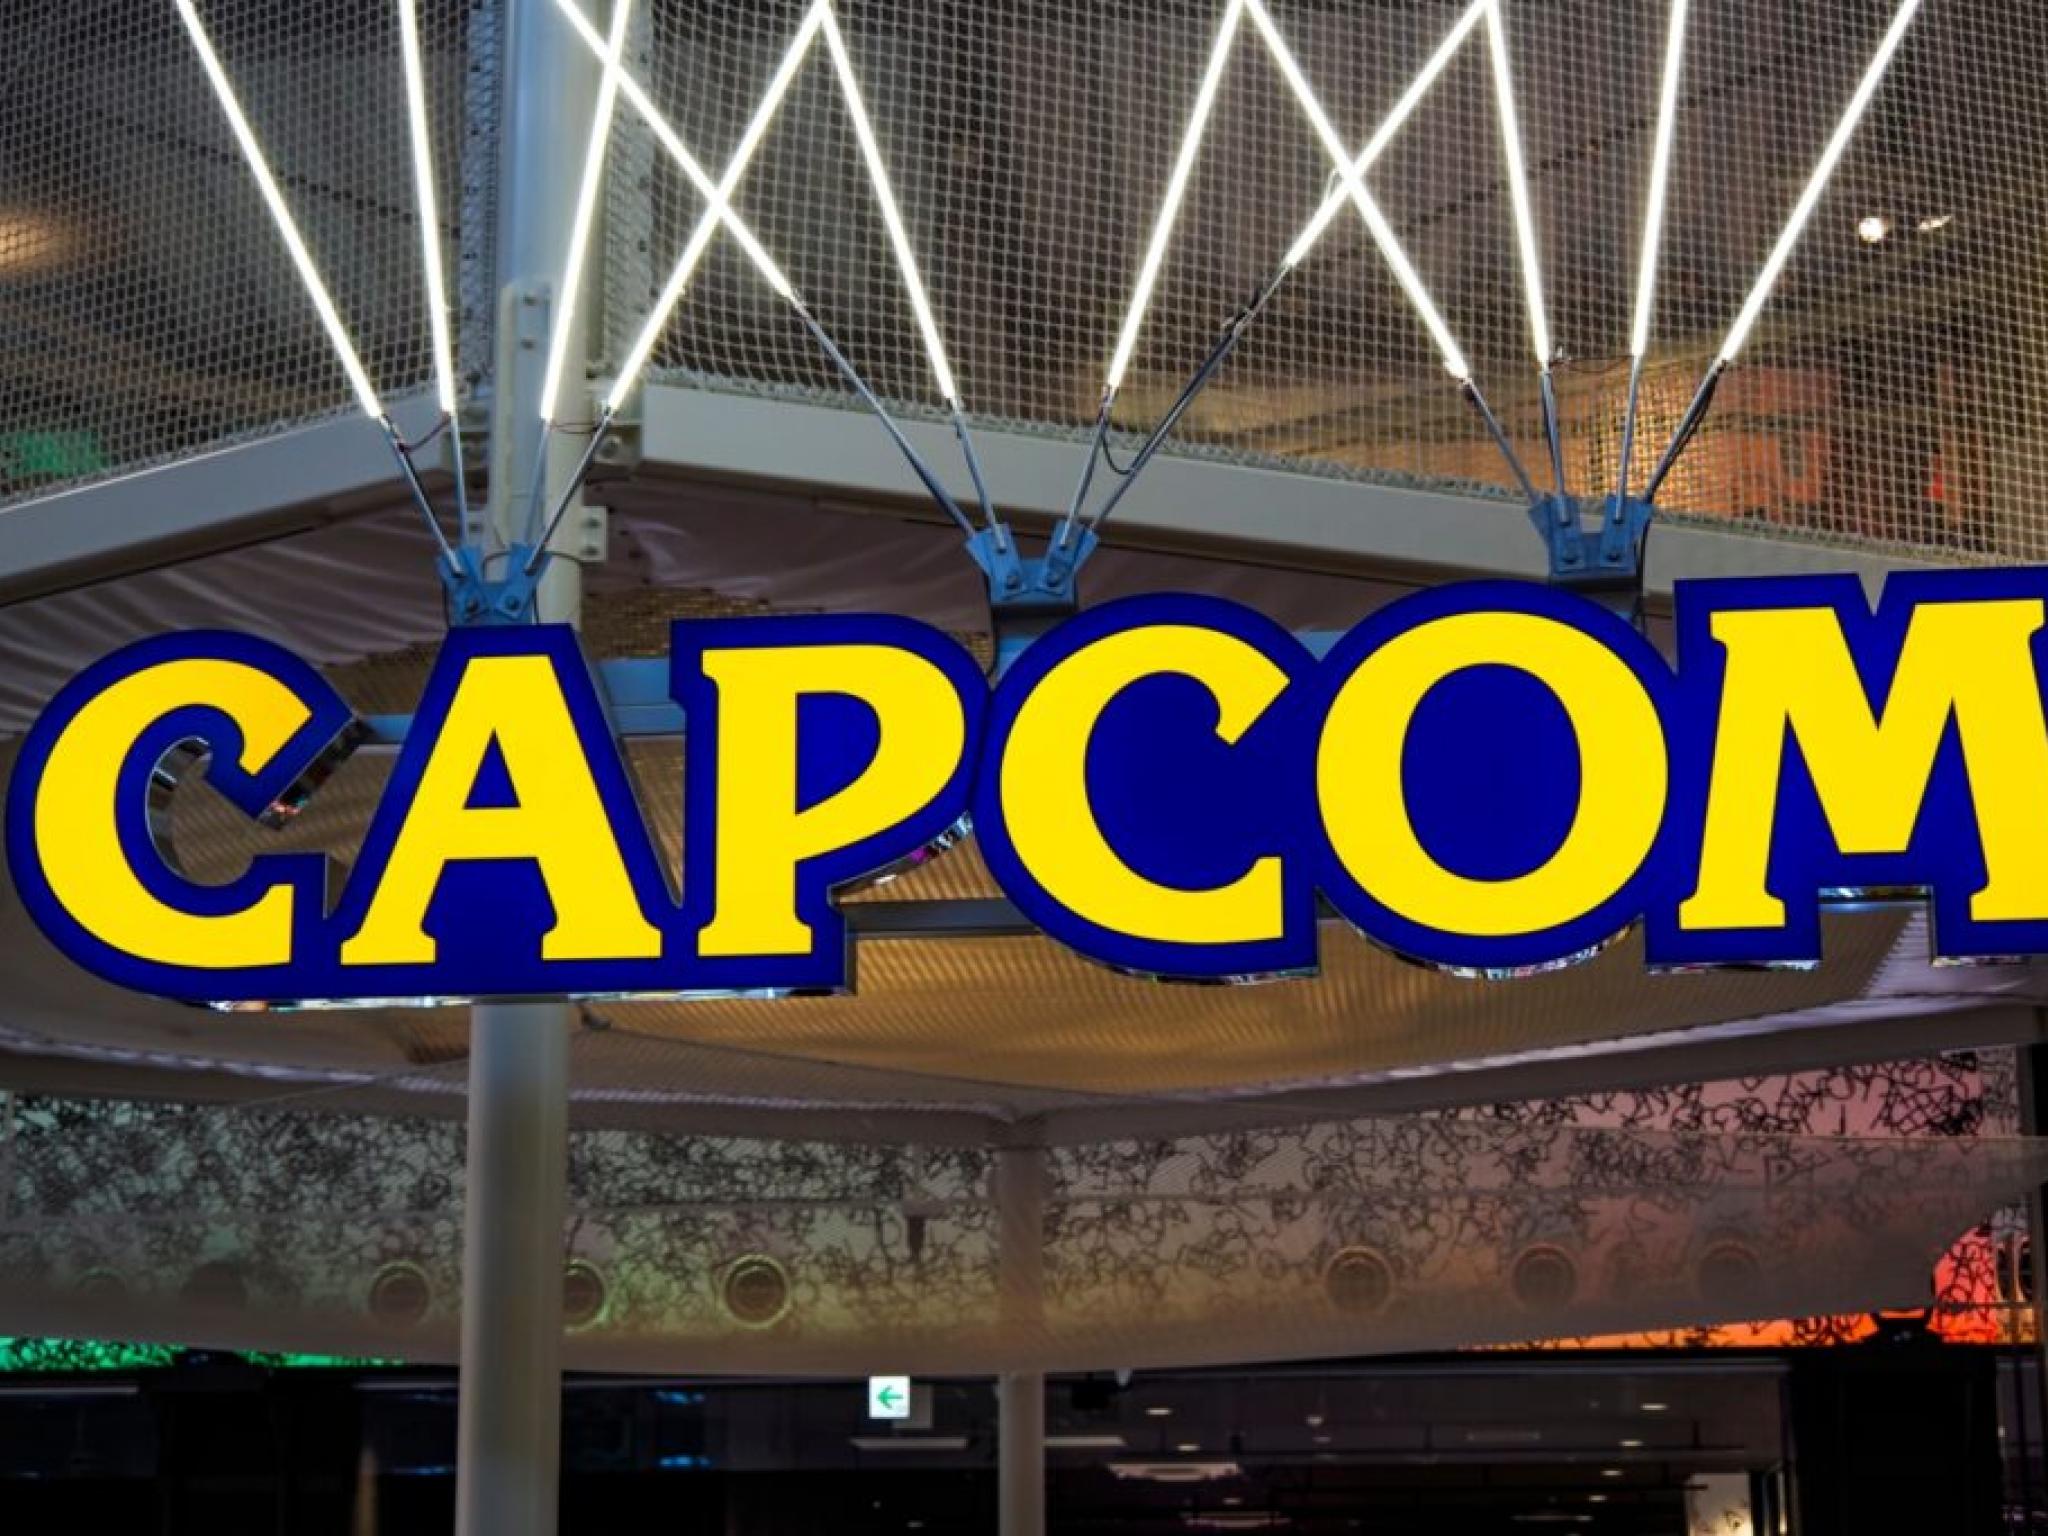  capcom-halts-new-content-for-exoprimal-whats-next-for-the-dino-shooter 